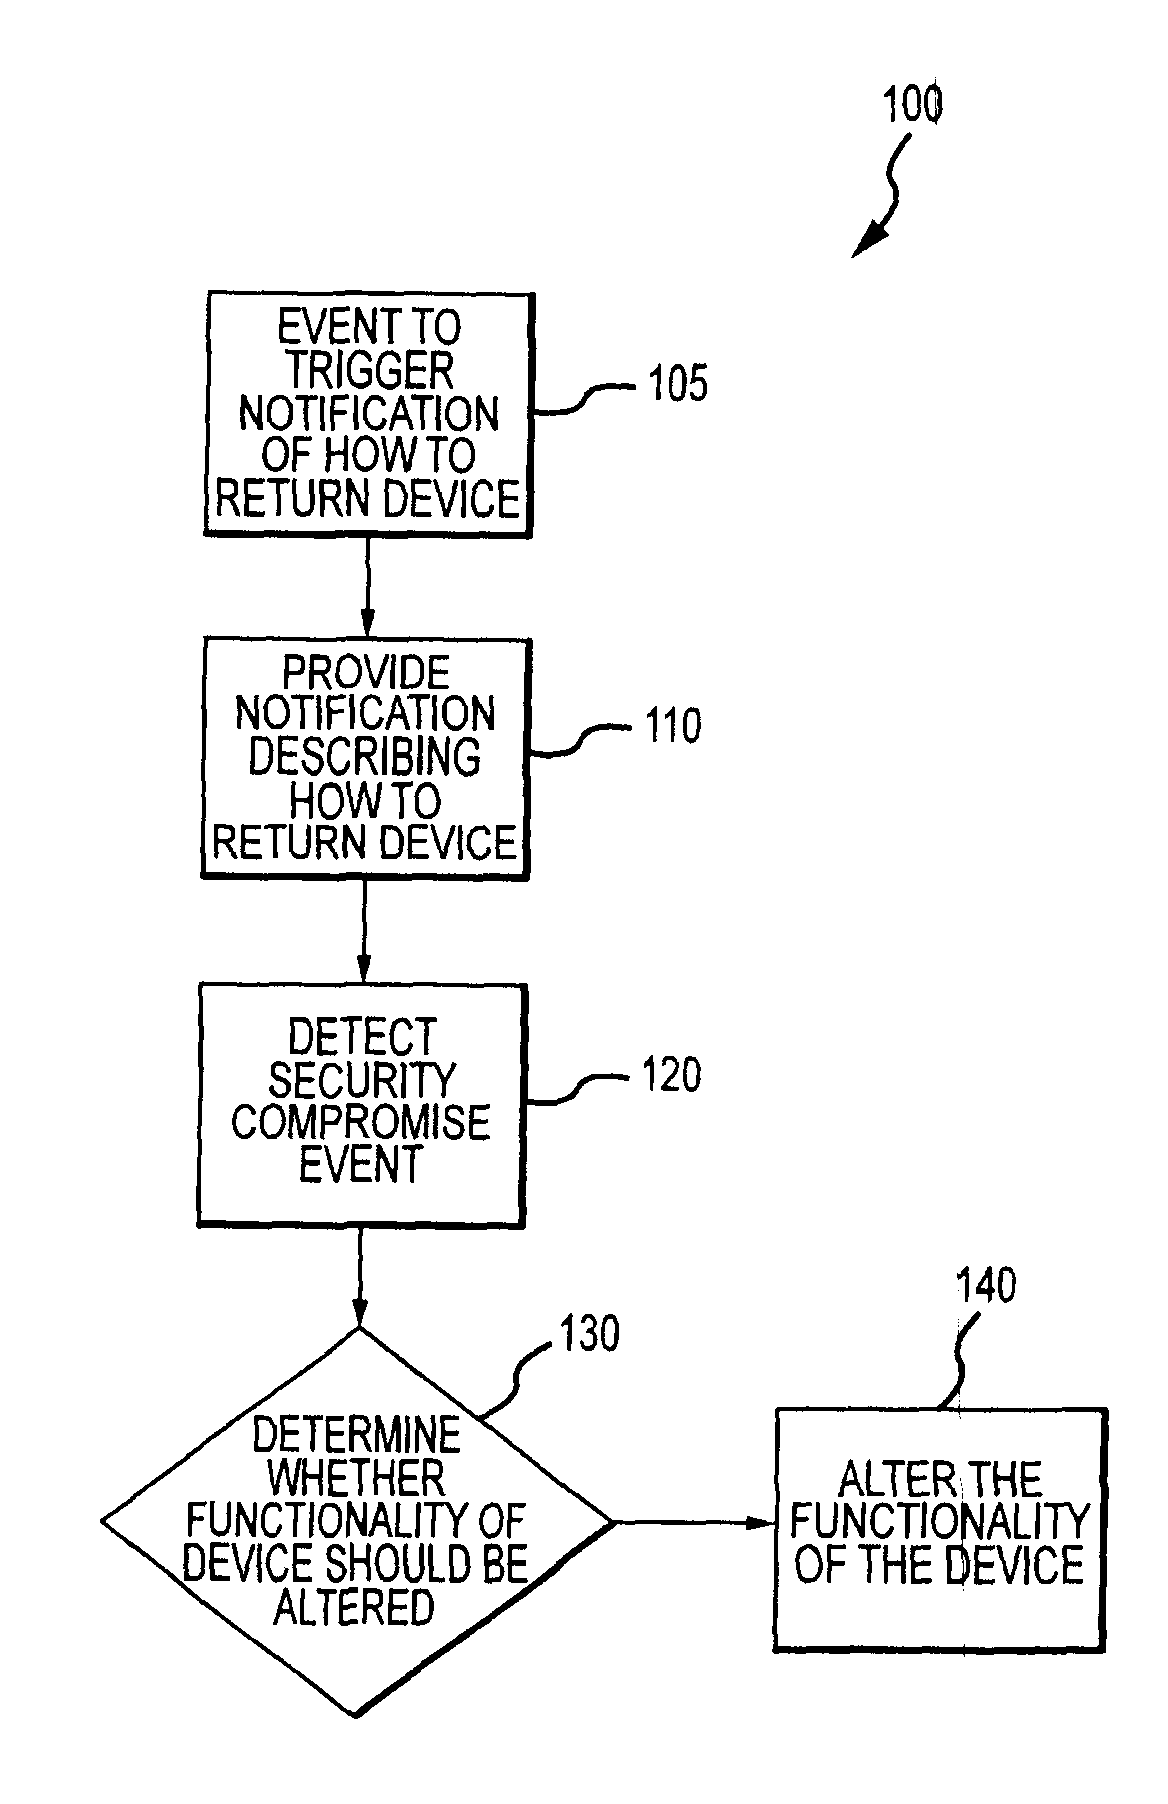 System for monitoring the unauthorized use of a device